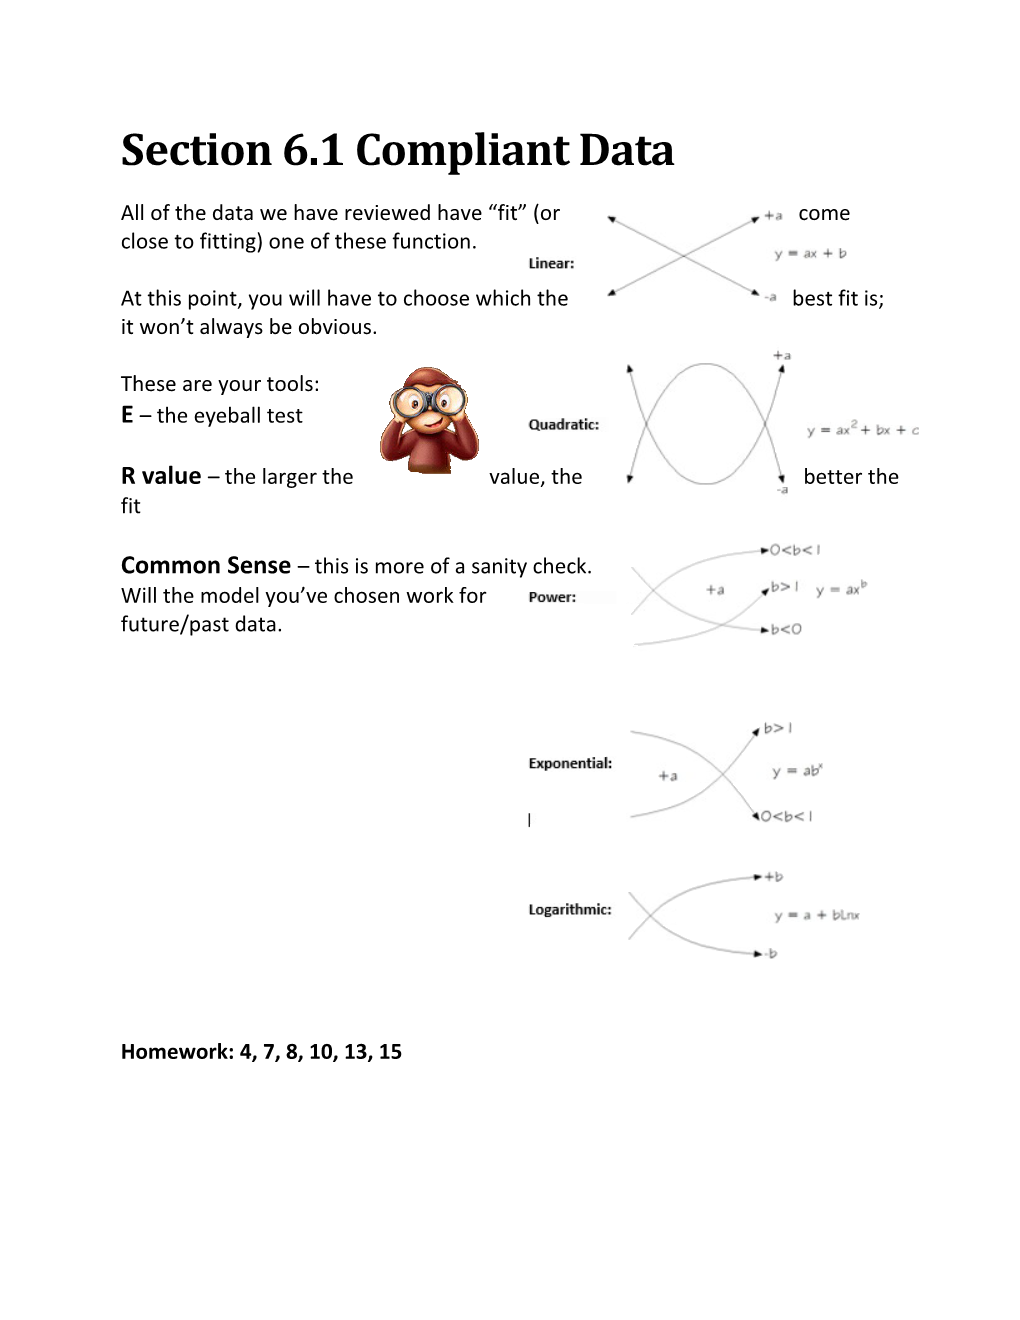 Section 6.1 Compliant Data